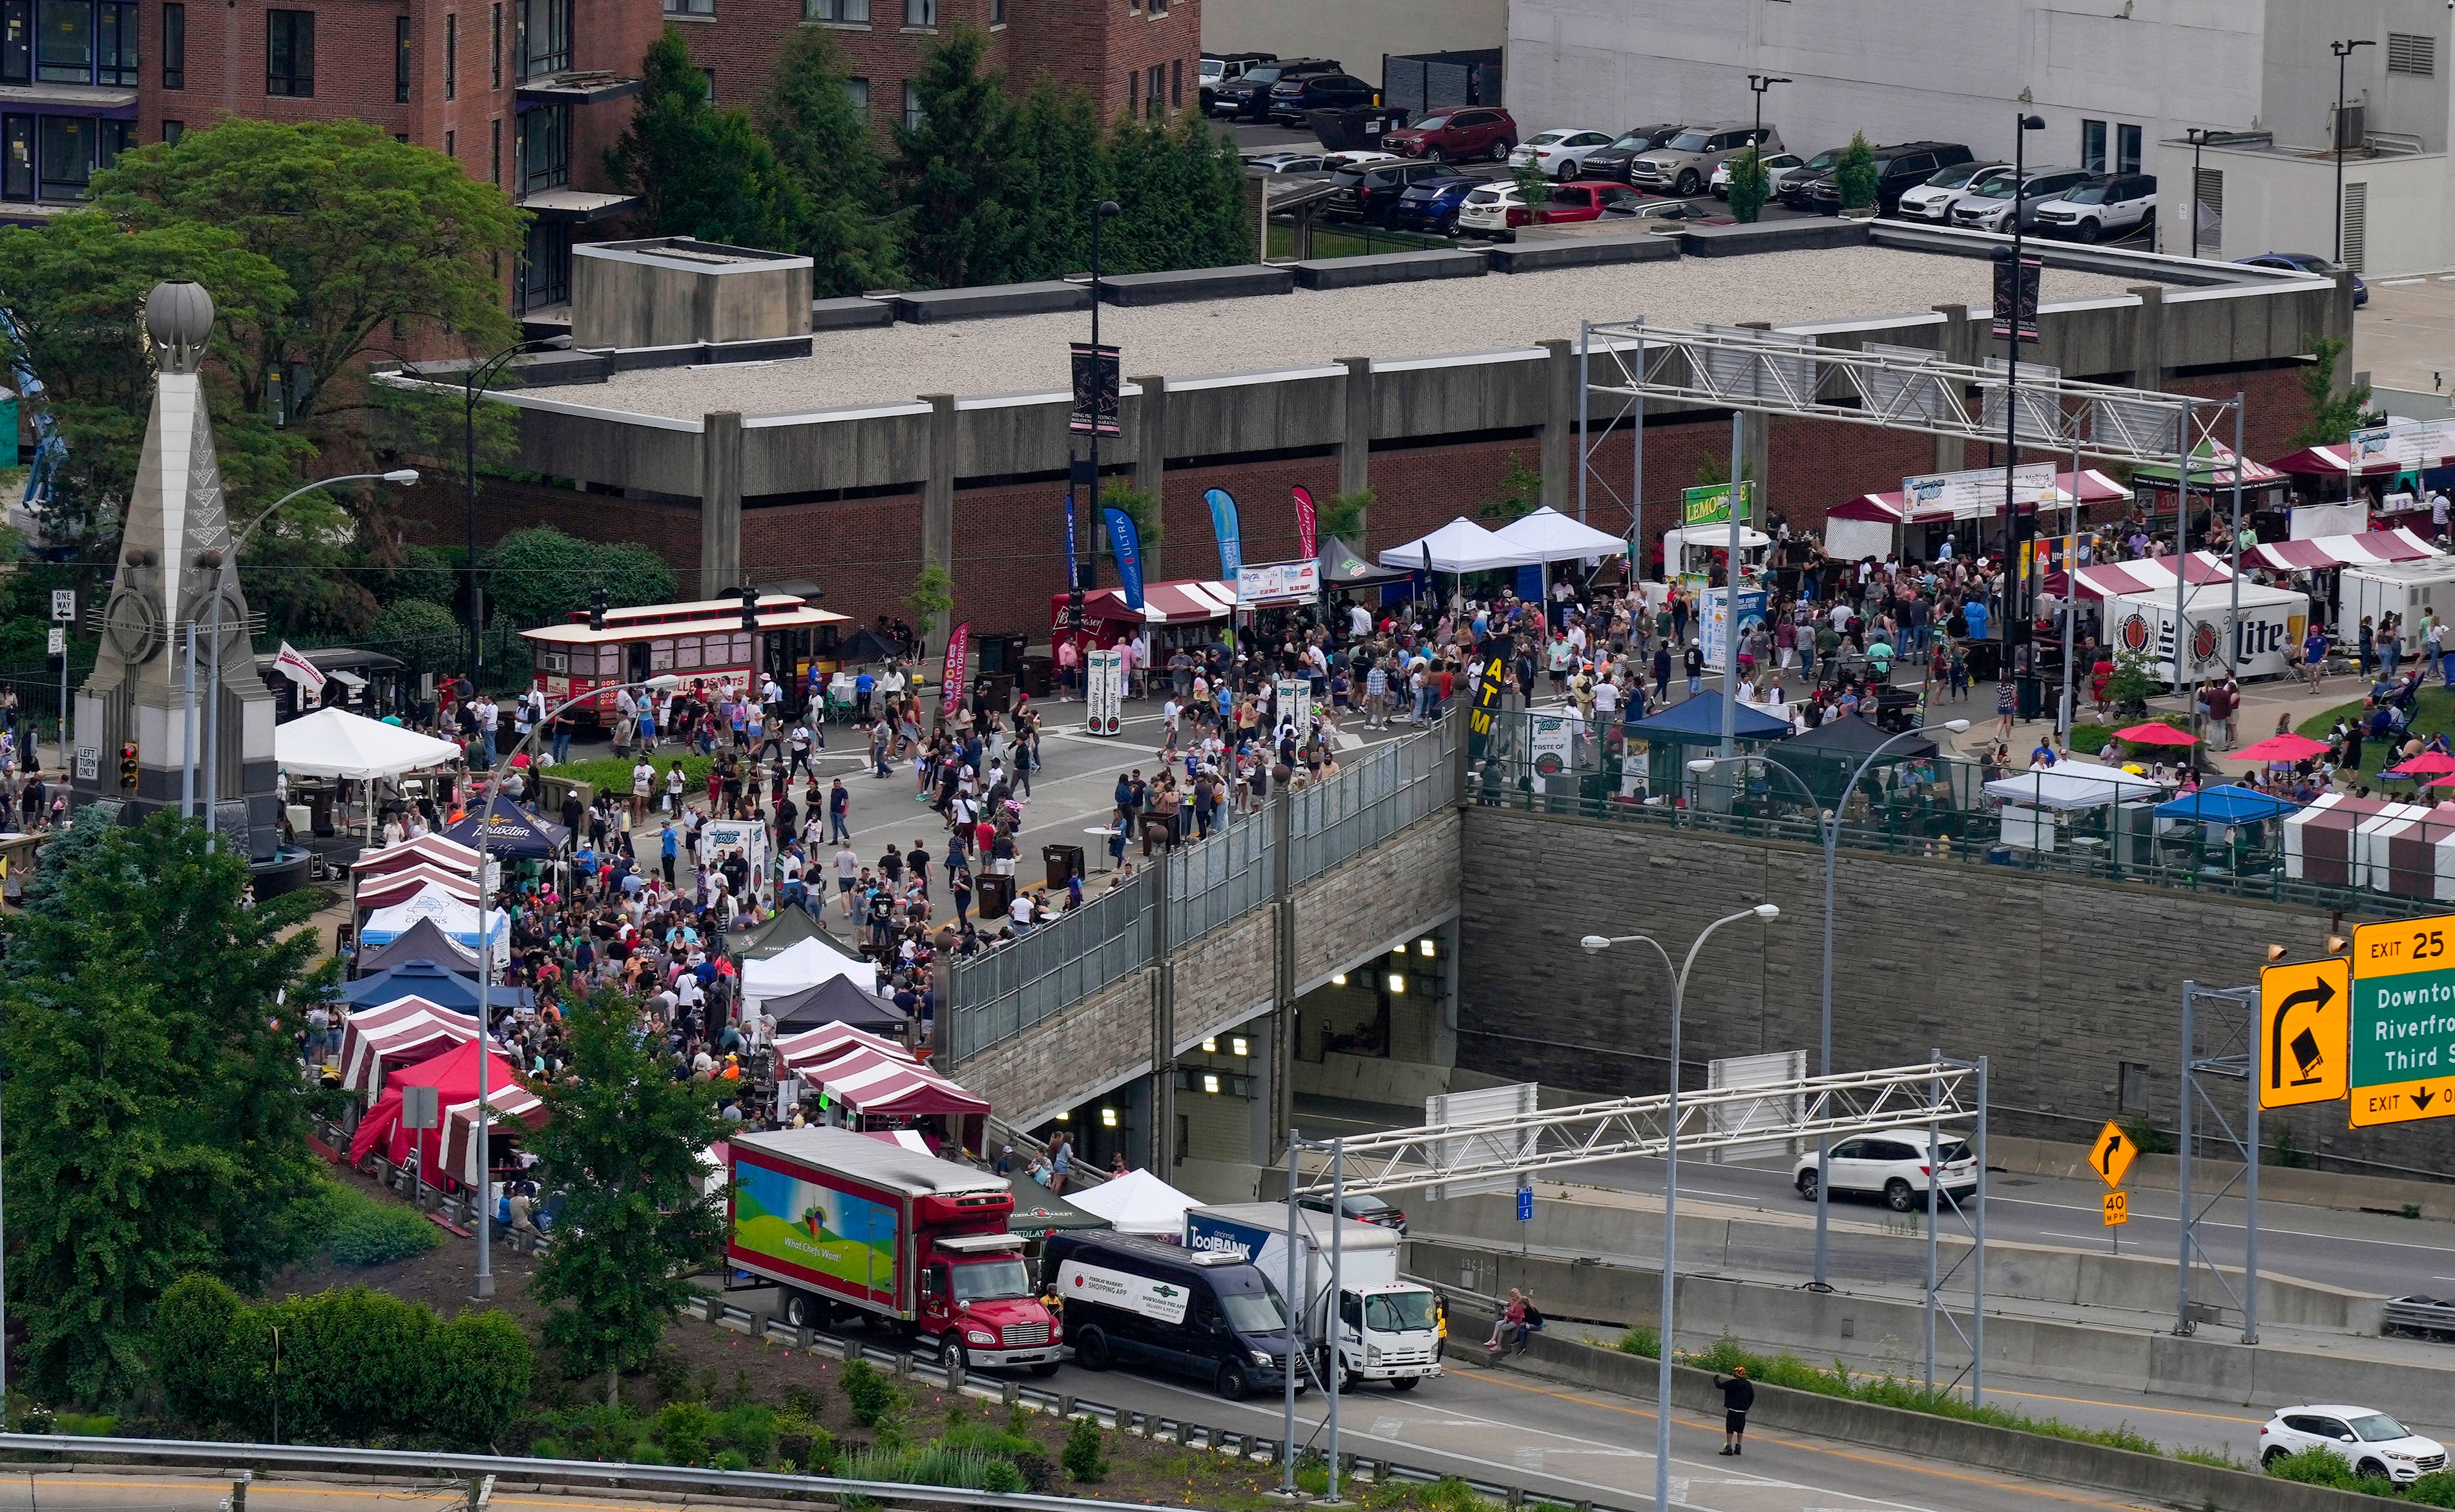 Going to Taste of Cincinnati? Here are driving and parking tips for heading downtown